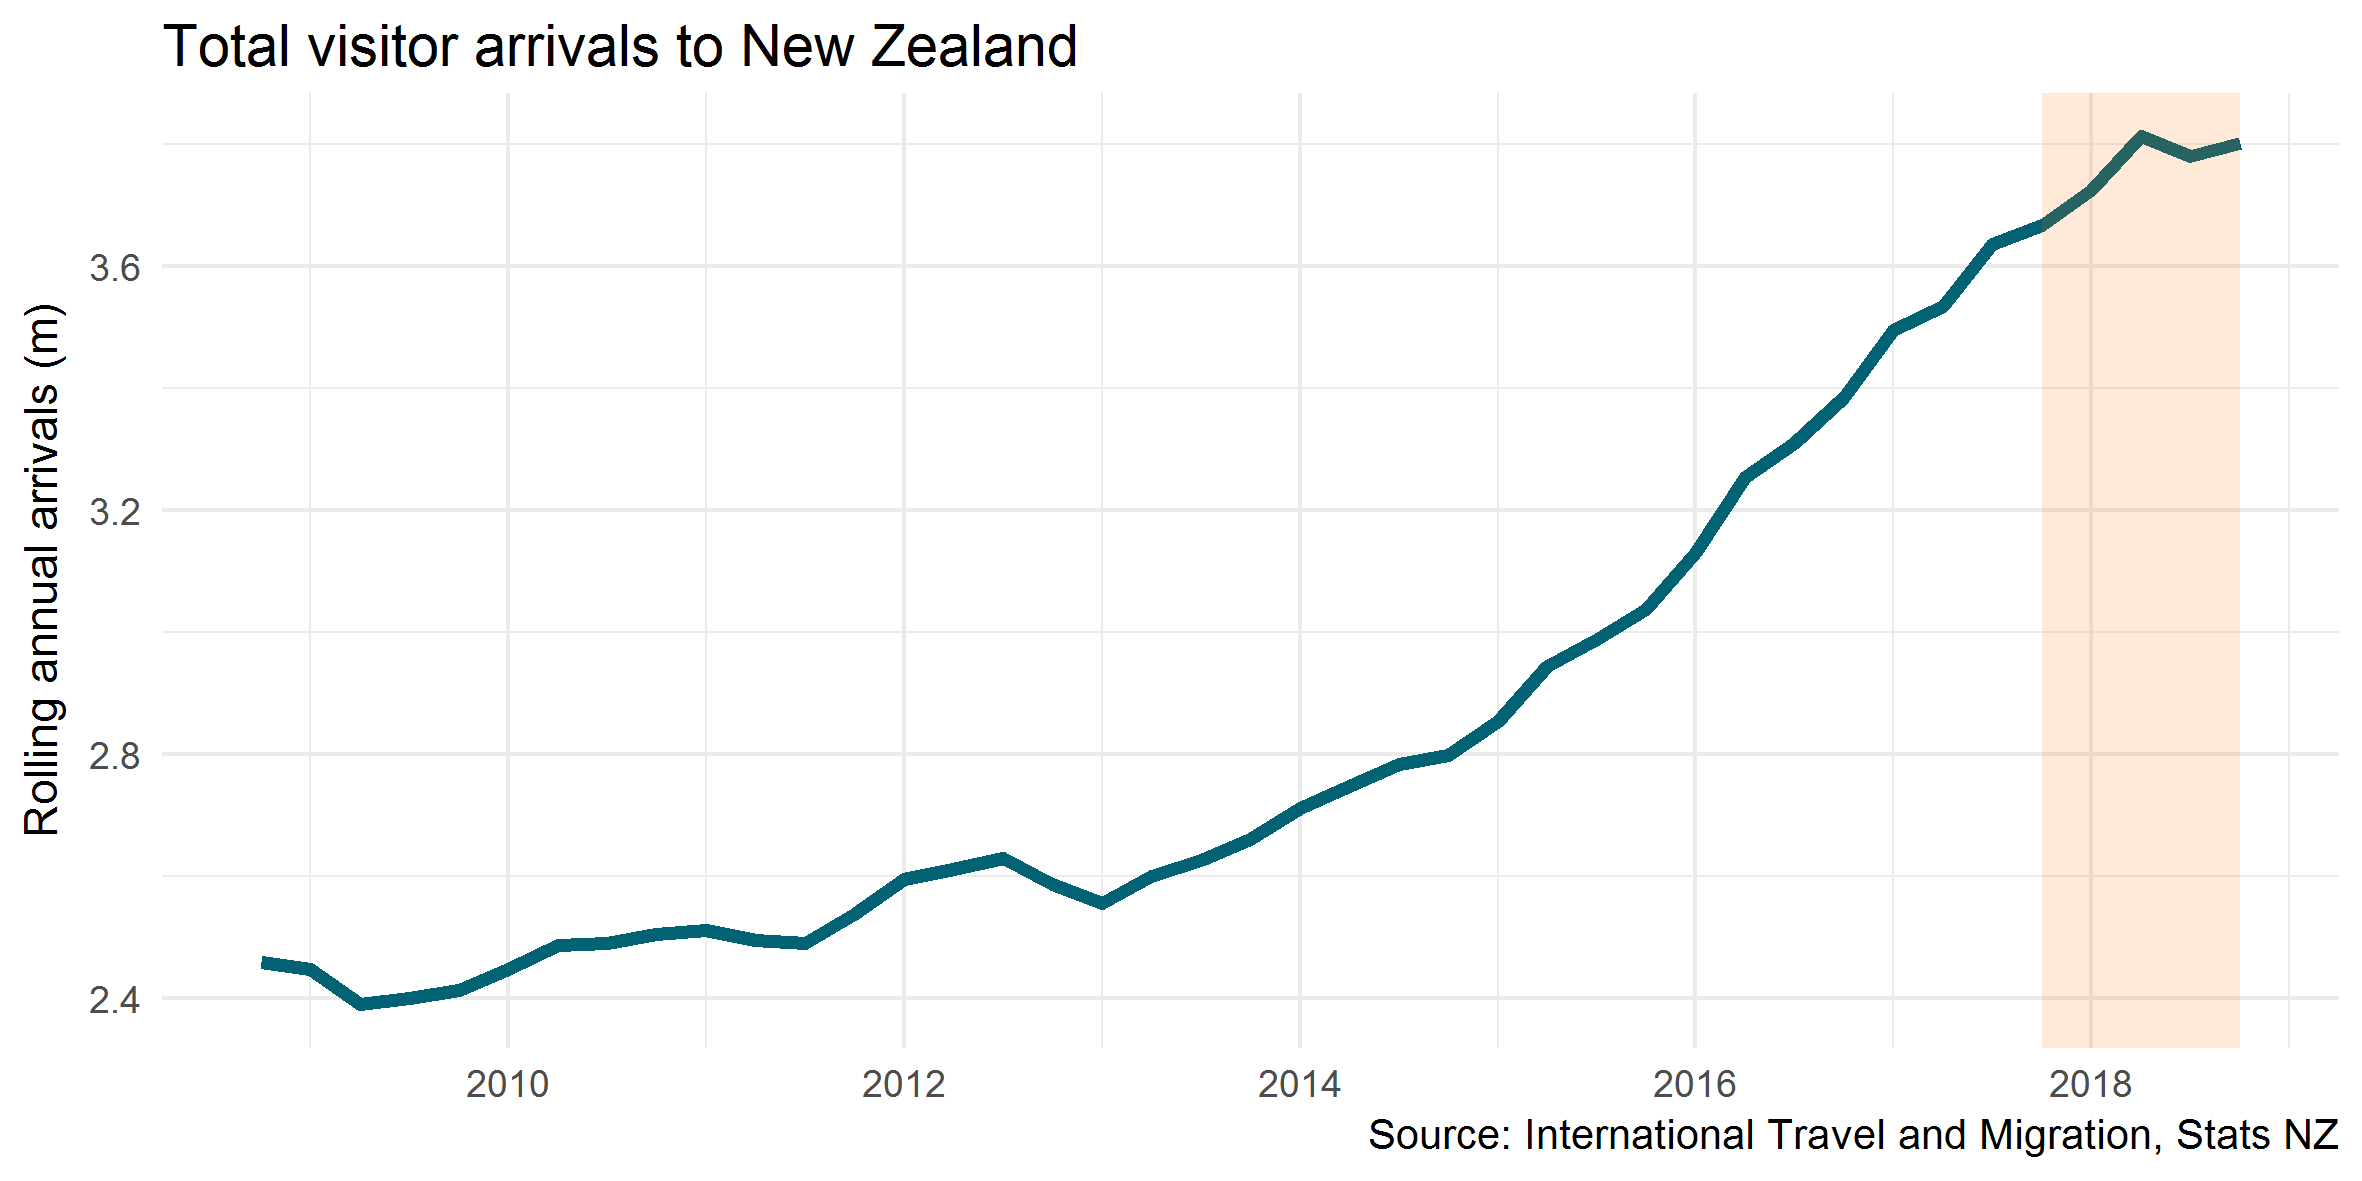 Total visitor arrivals to New Zealand